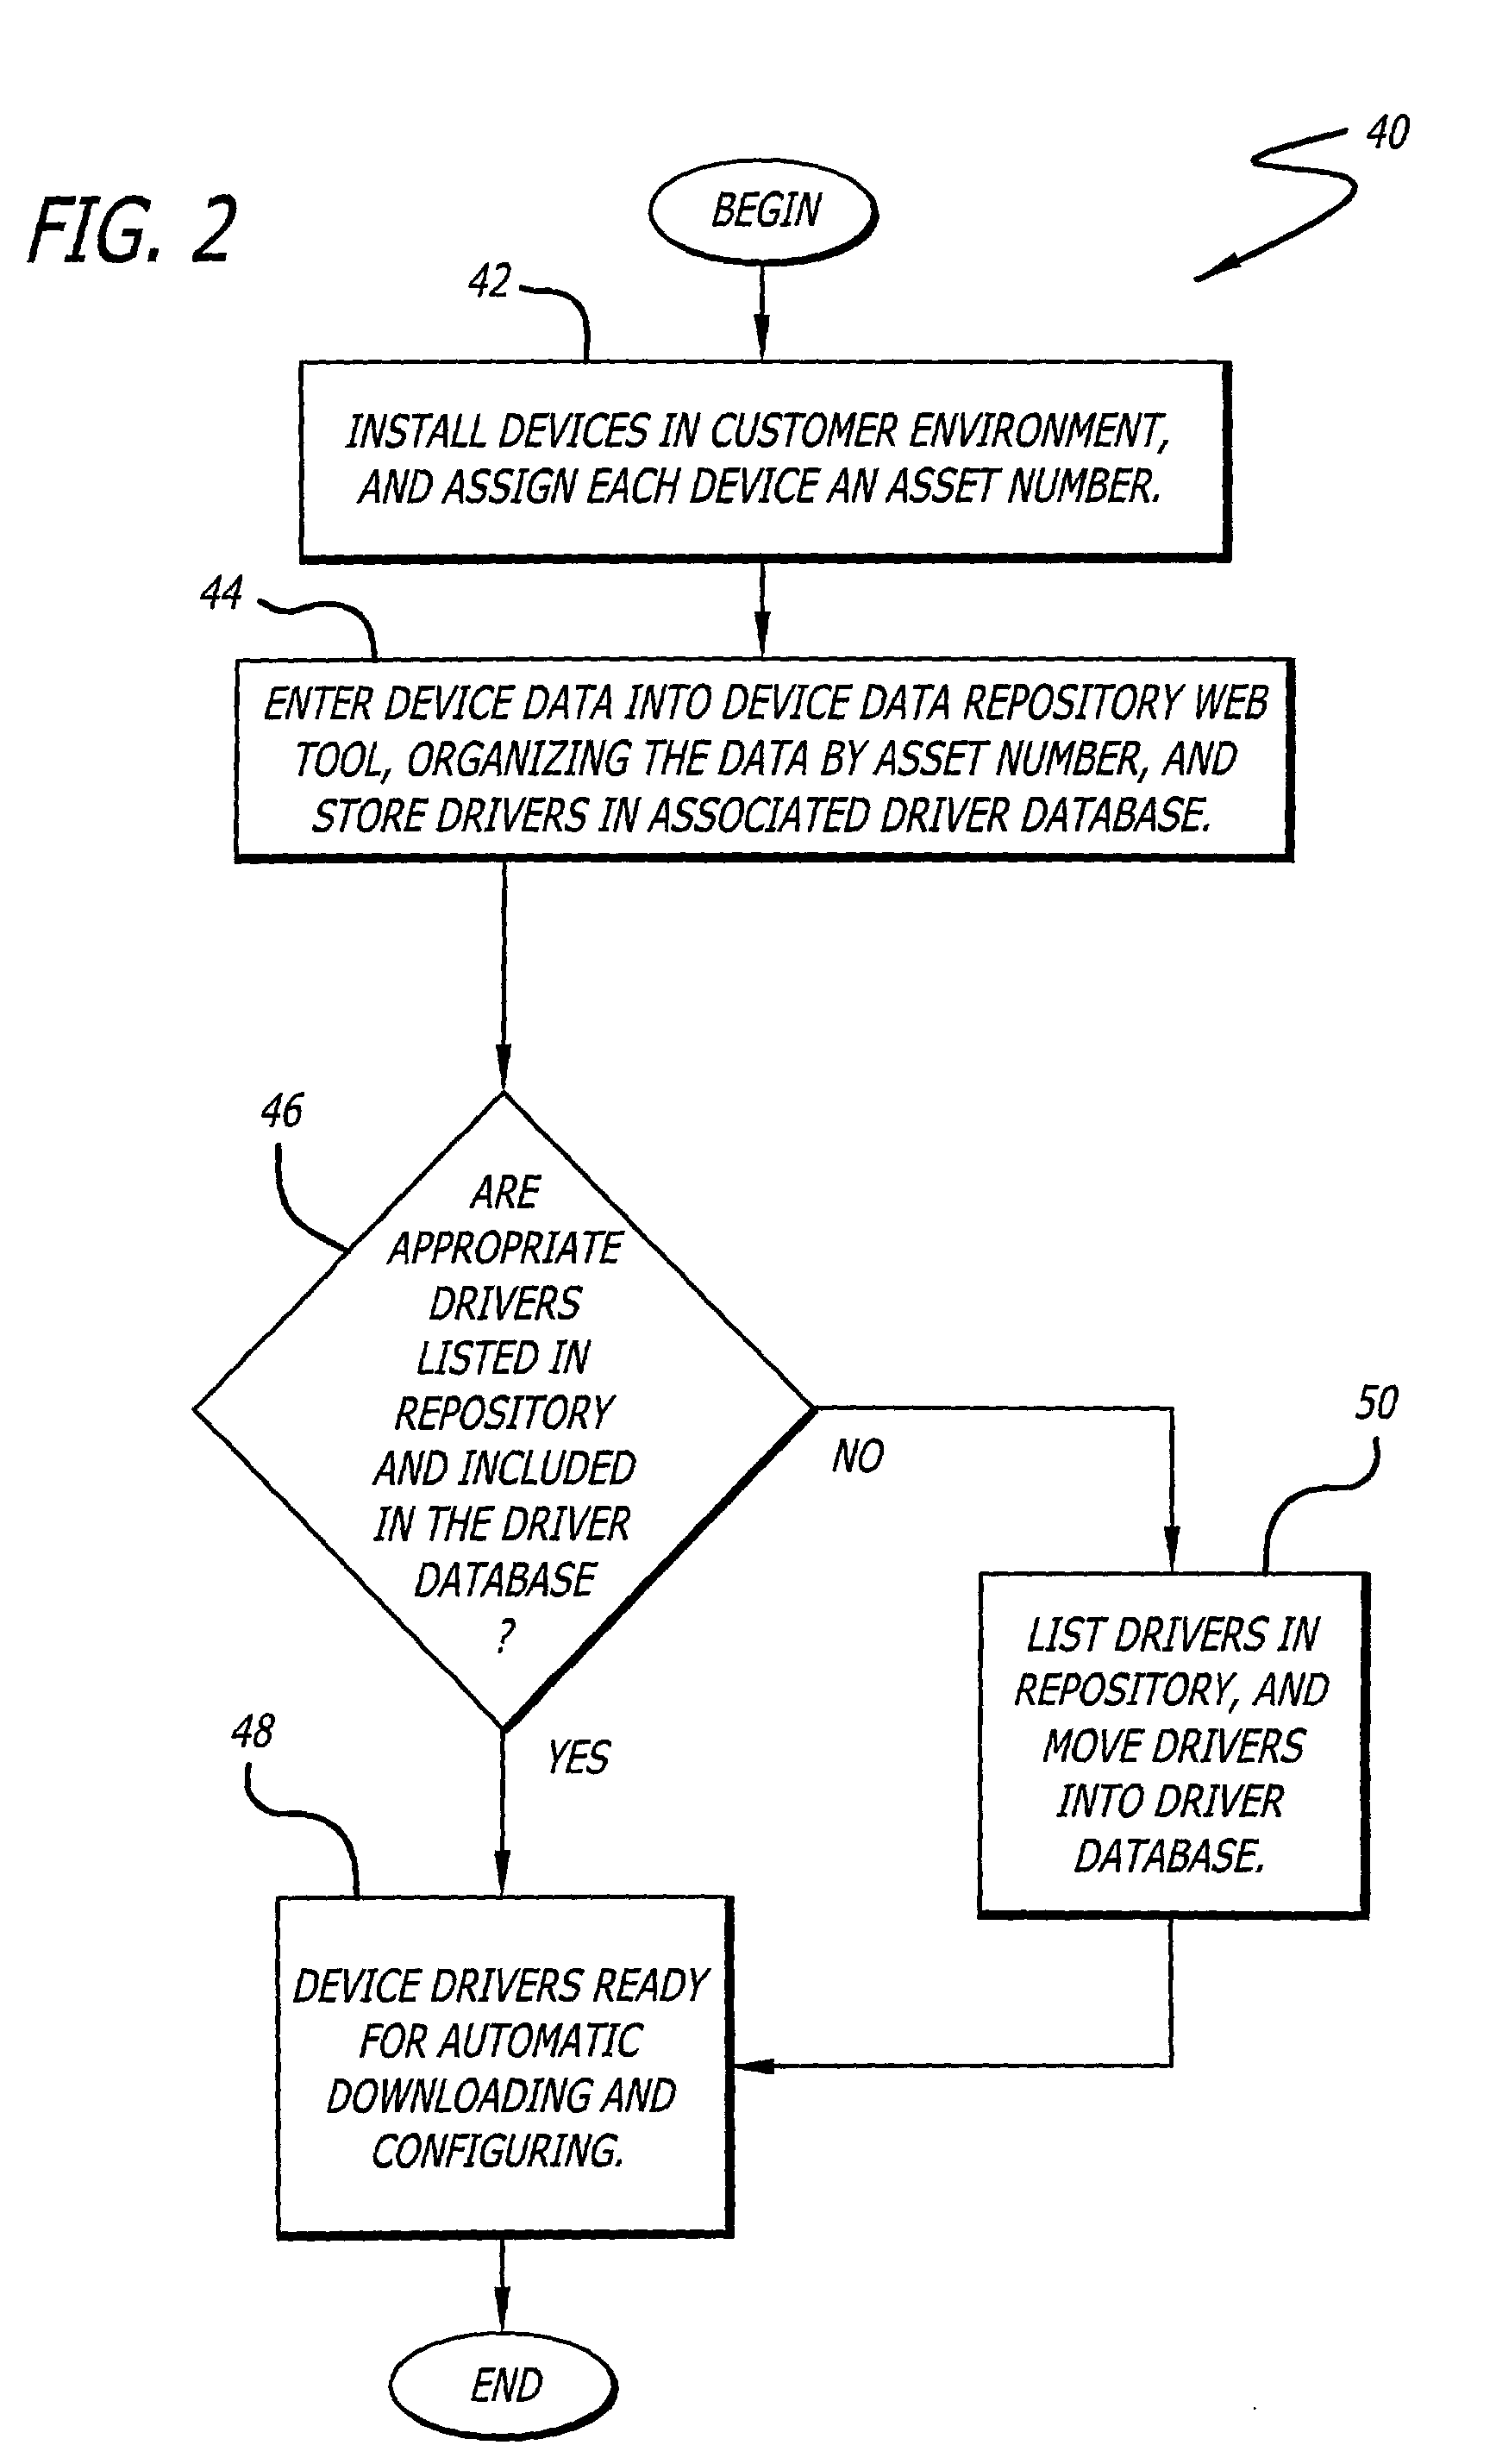 System and method for efficiently installing and configuring device drivers in managed environments